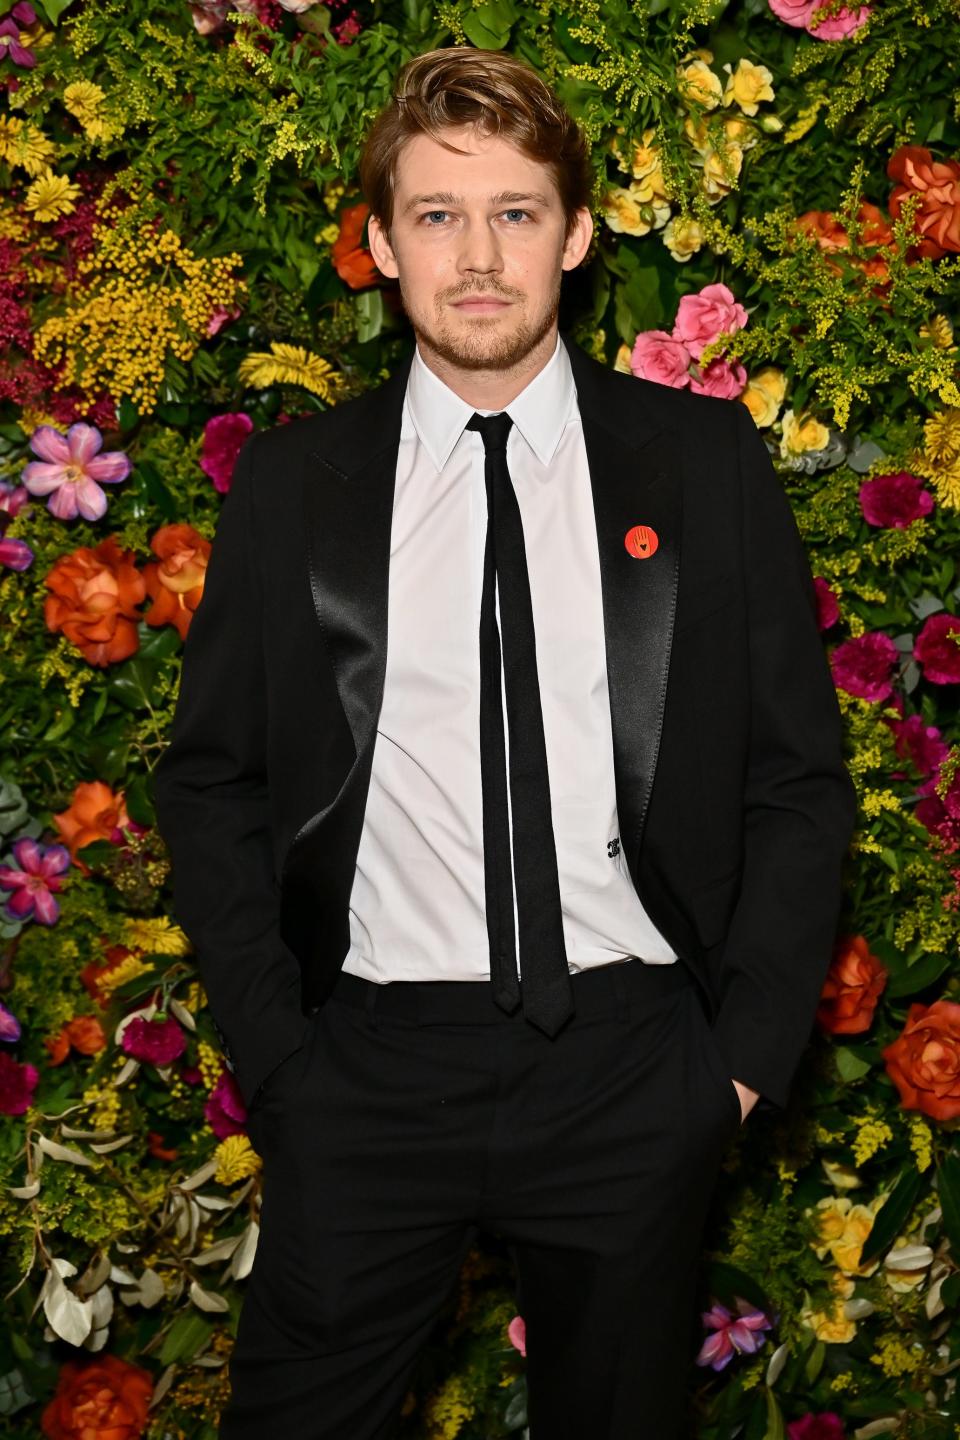 Joe Alwyn stands in front of a floral backdrop wearing a black suit and tie with a red poppy pin